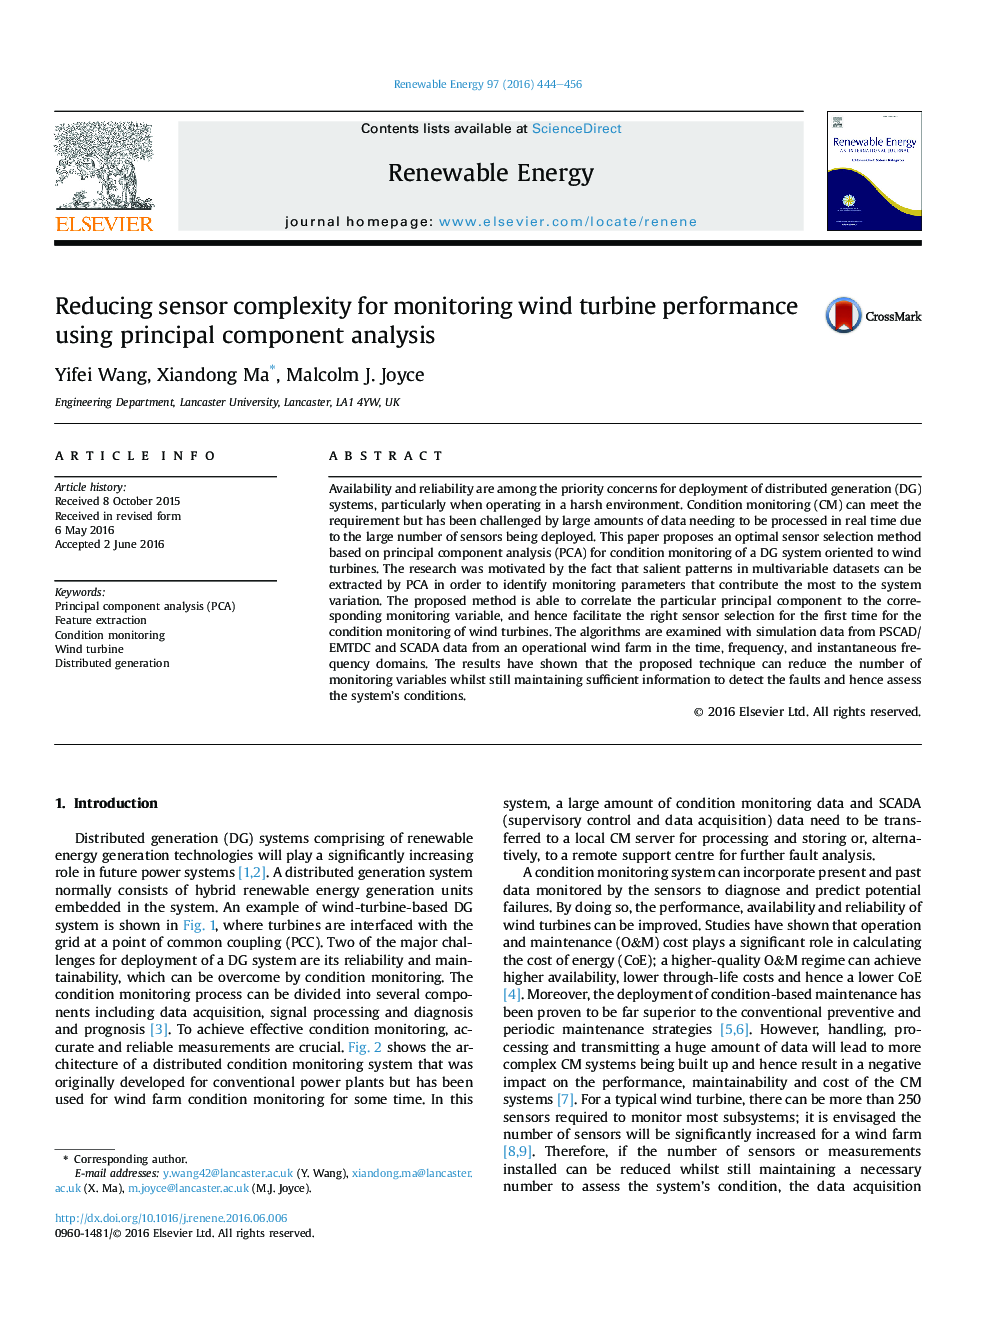 Reducing sensor complexity for monitoring wind turbine performance using principal component analysis